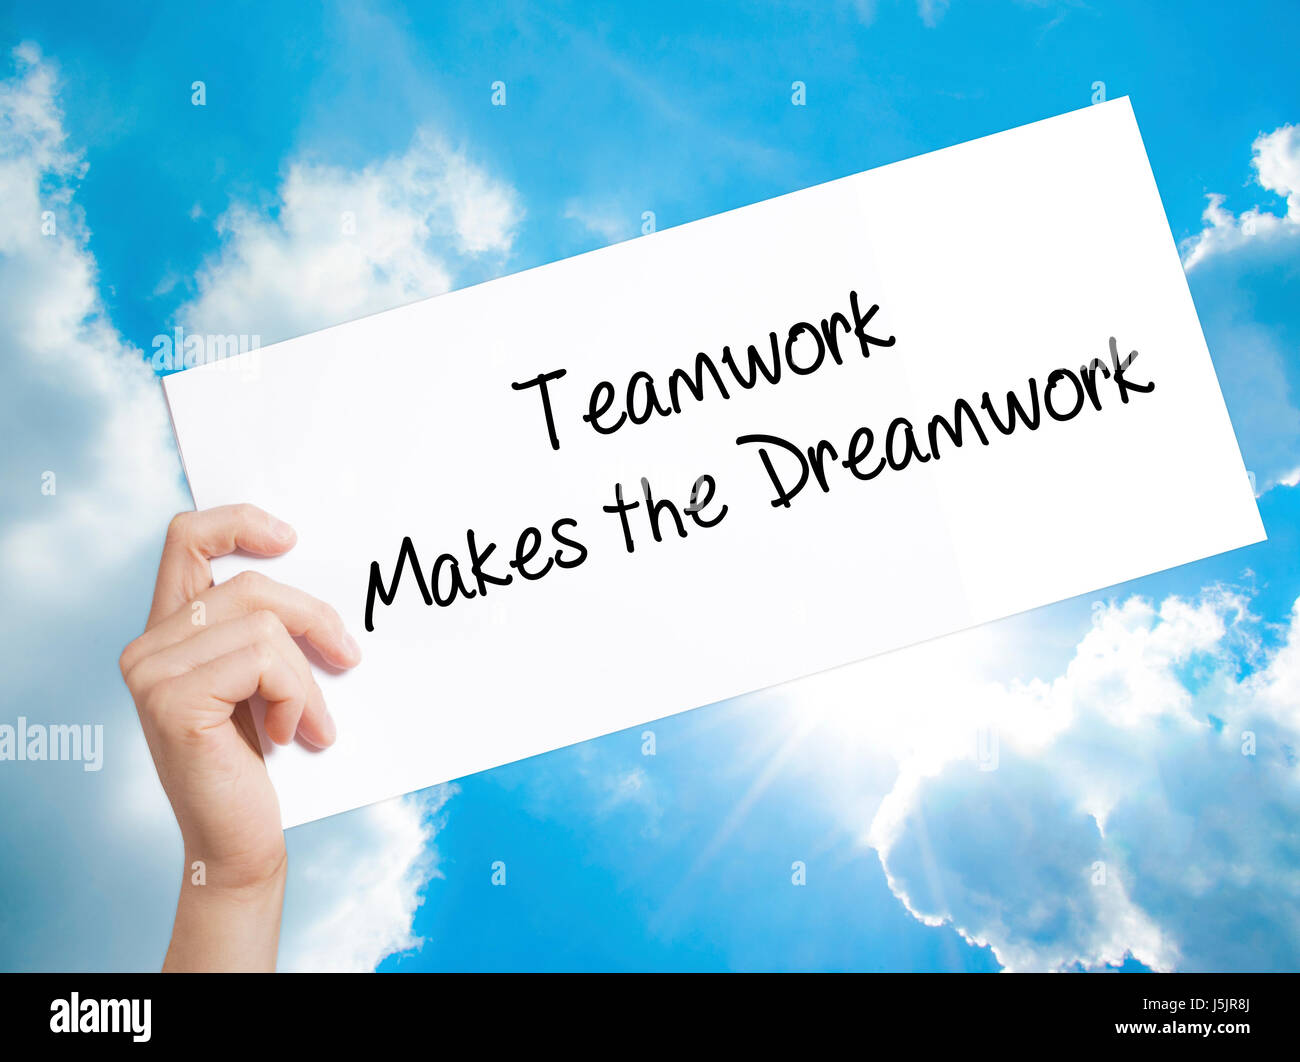 Teamwork Makes the Dreamwork Sign on white paper. Man Hand Holding Paper with text. Isolated on sky background.  Business concept. Stock Photo Stock Photo